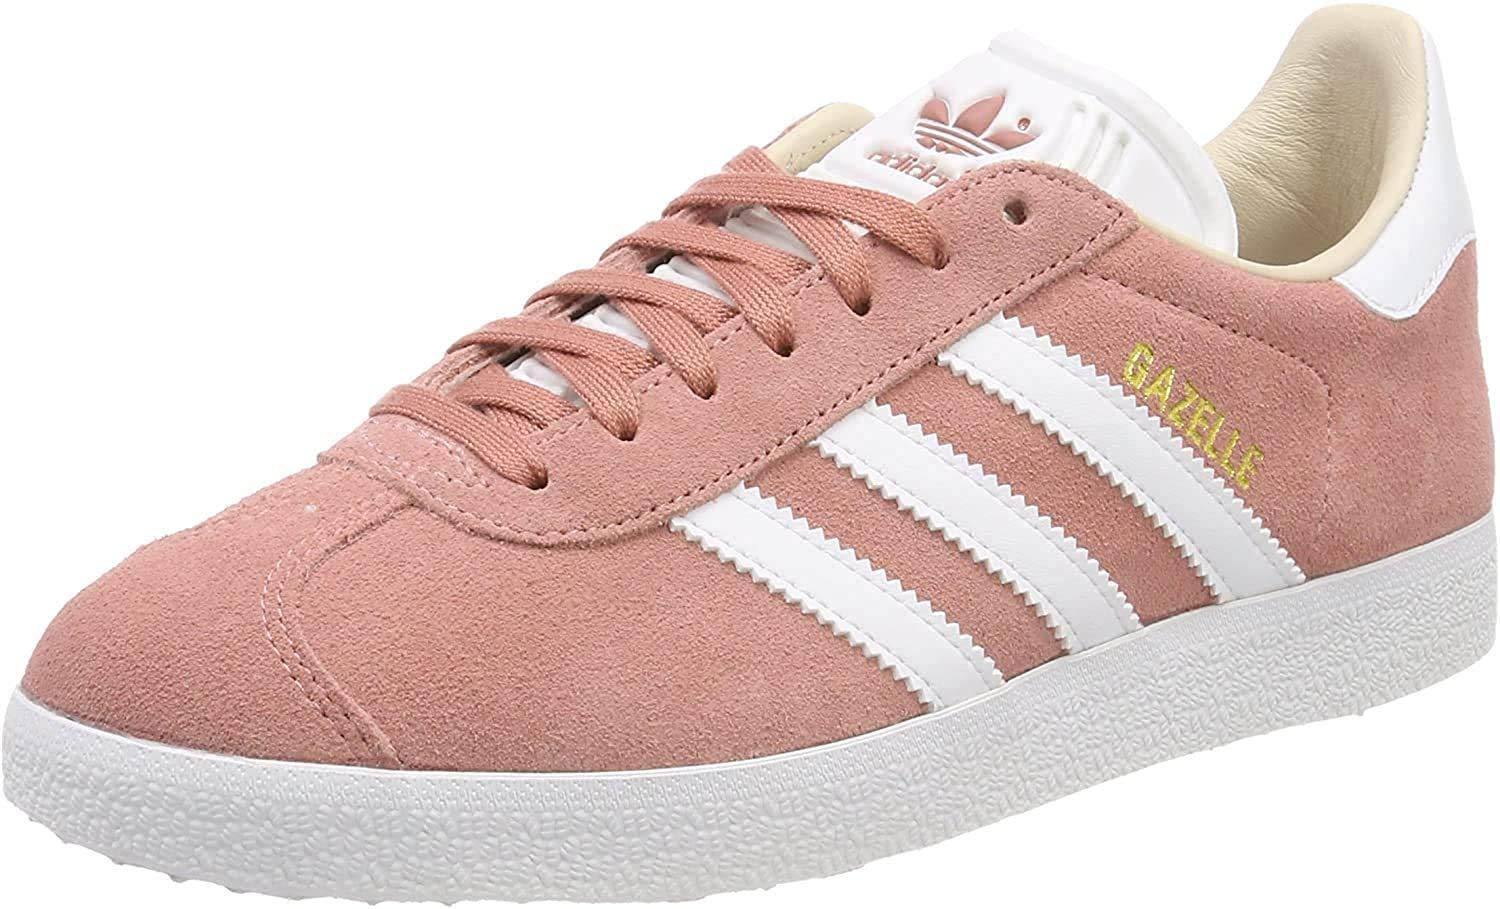 adidas Gazelle, Trainers For S. Black, Pink,red, Blue. Sneakers. - Save 53%  - Lyst